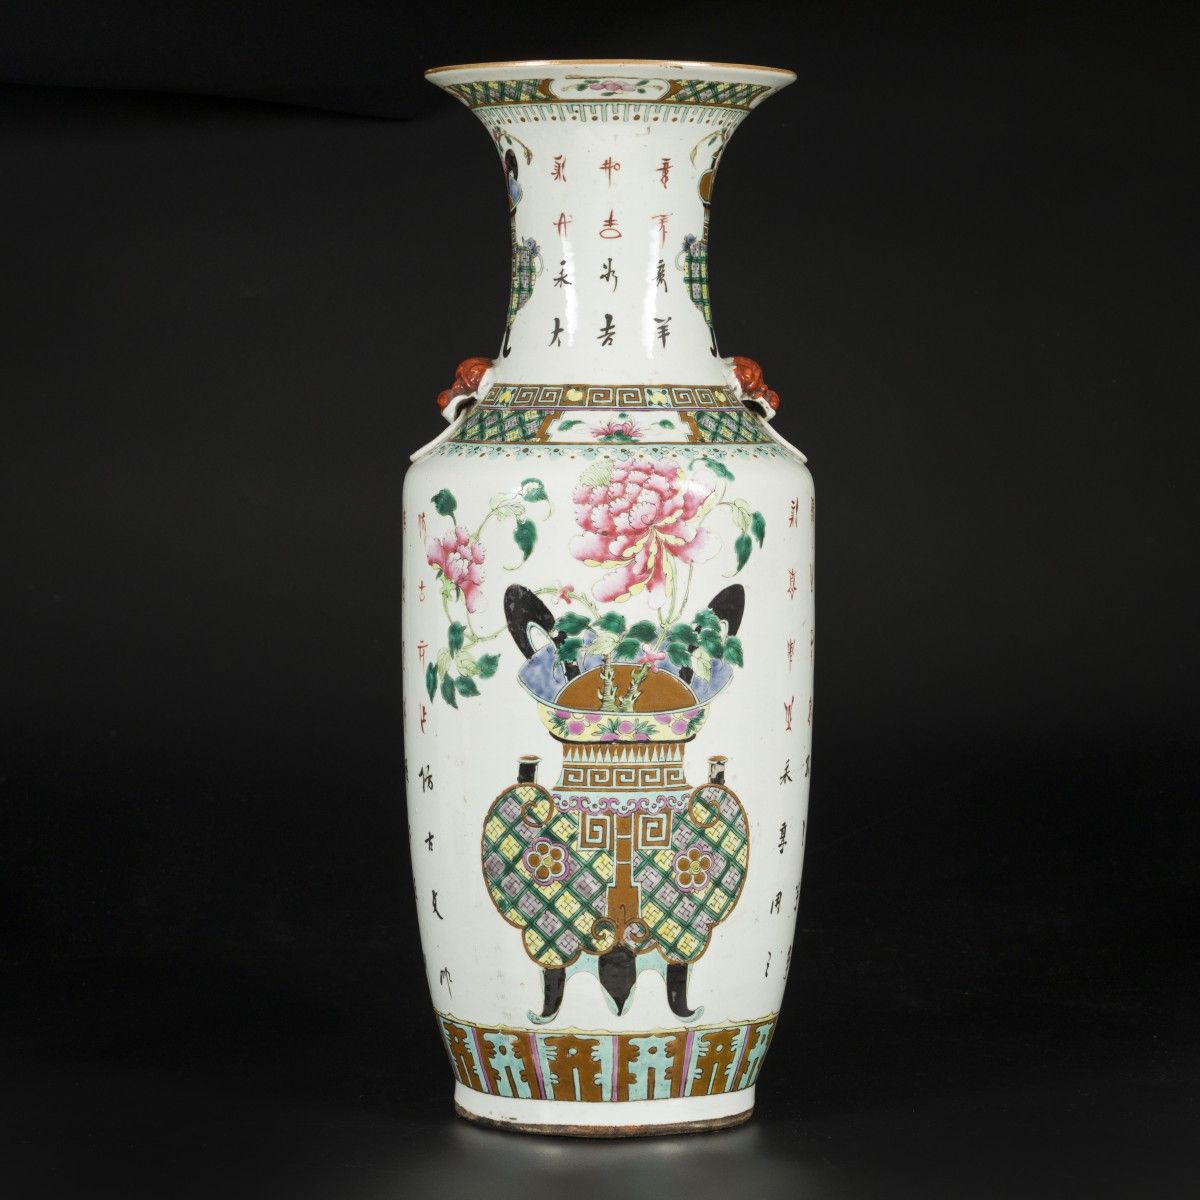 A porcelain Qiangjiang Cai vase with decoration of flowers in a vase, China, lat&hellip;